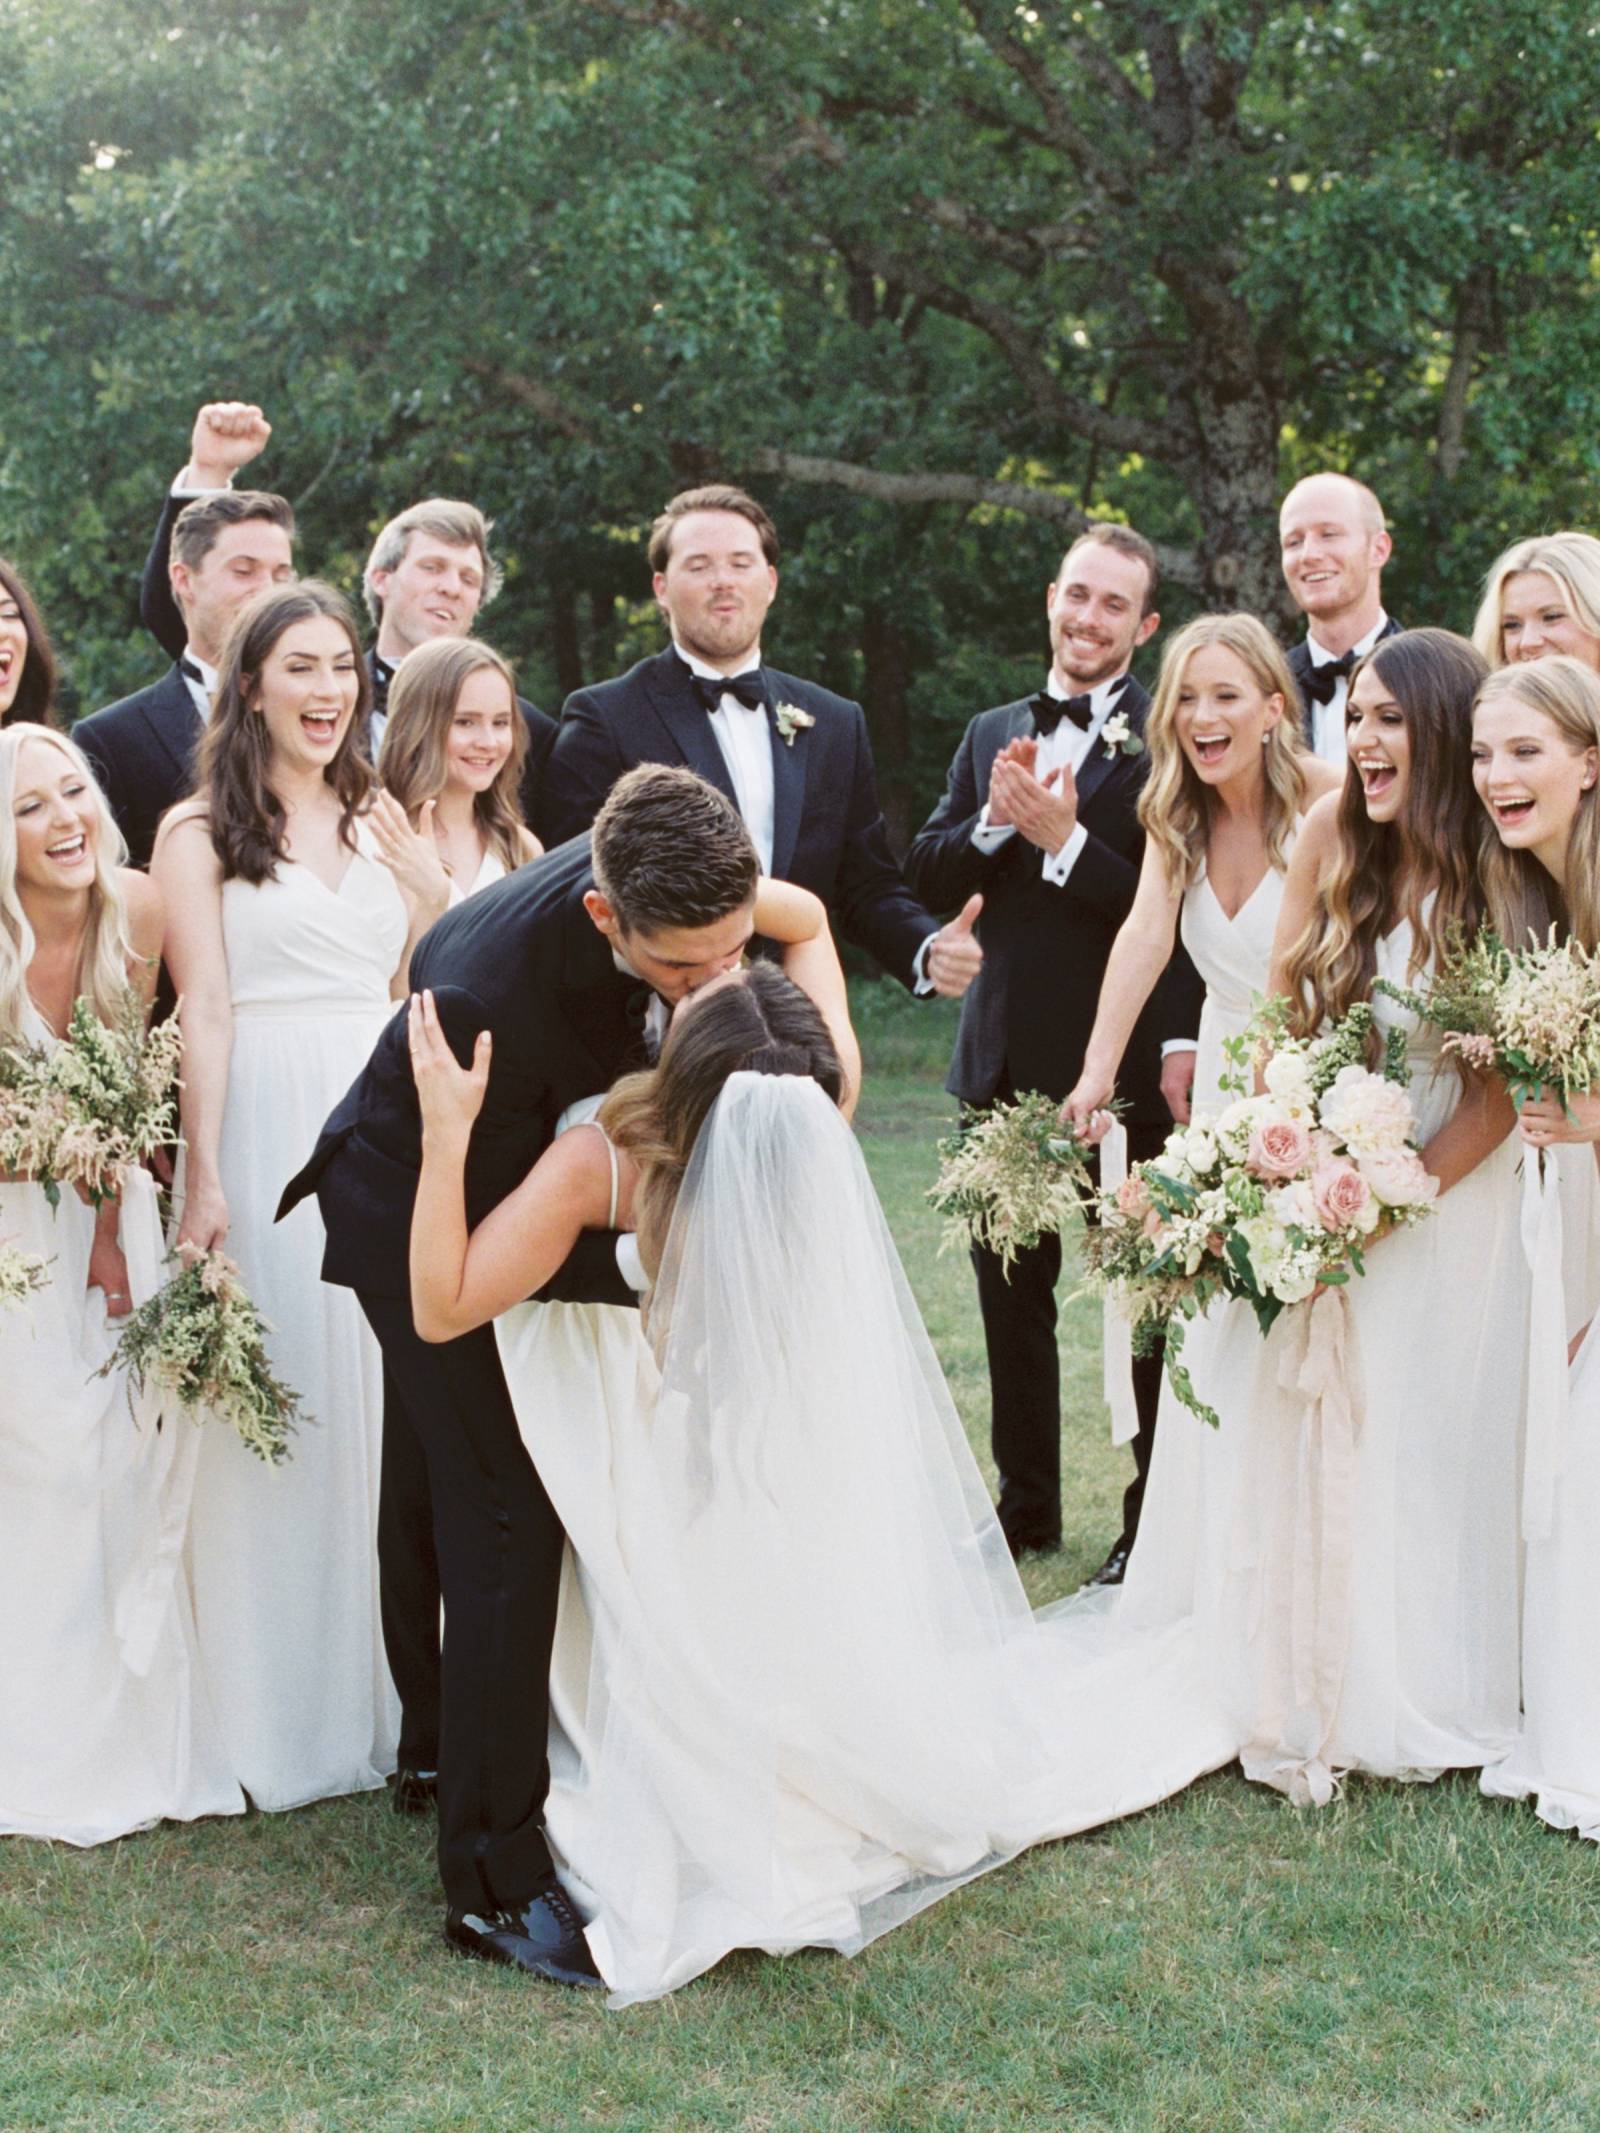 Texas wedding at The White Sparrow with an all white bridal party ...